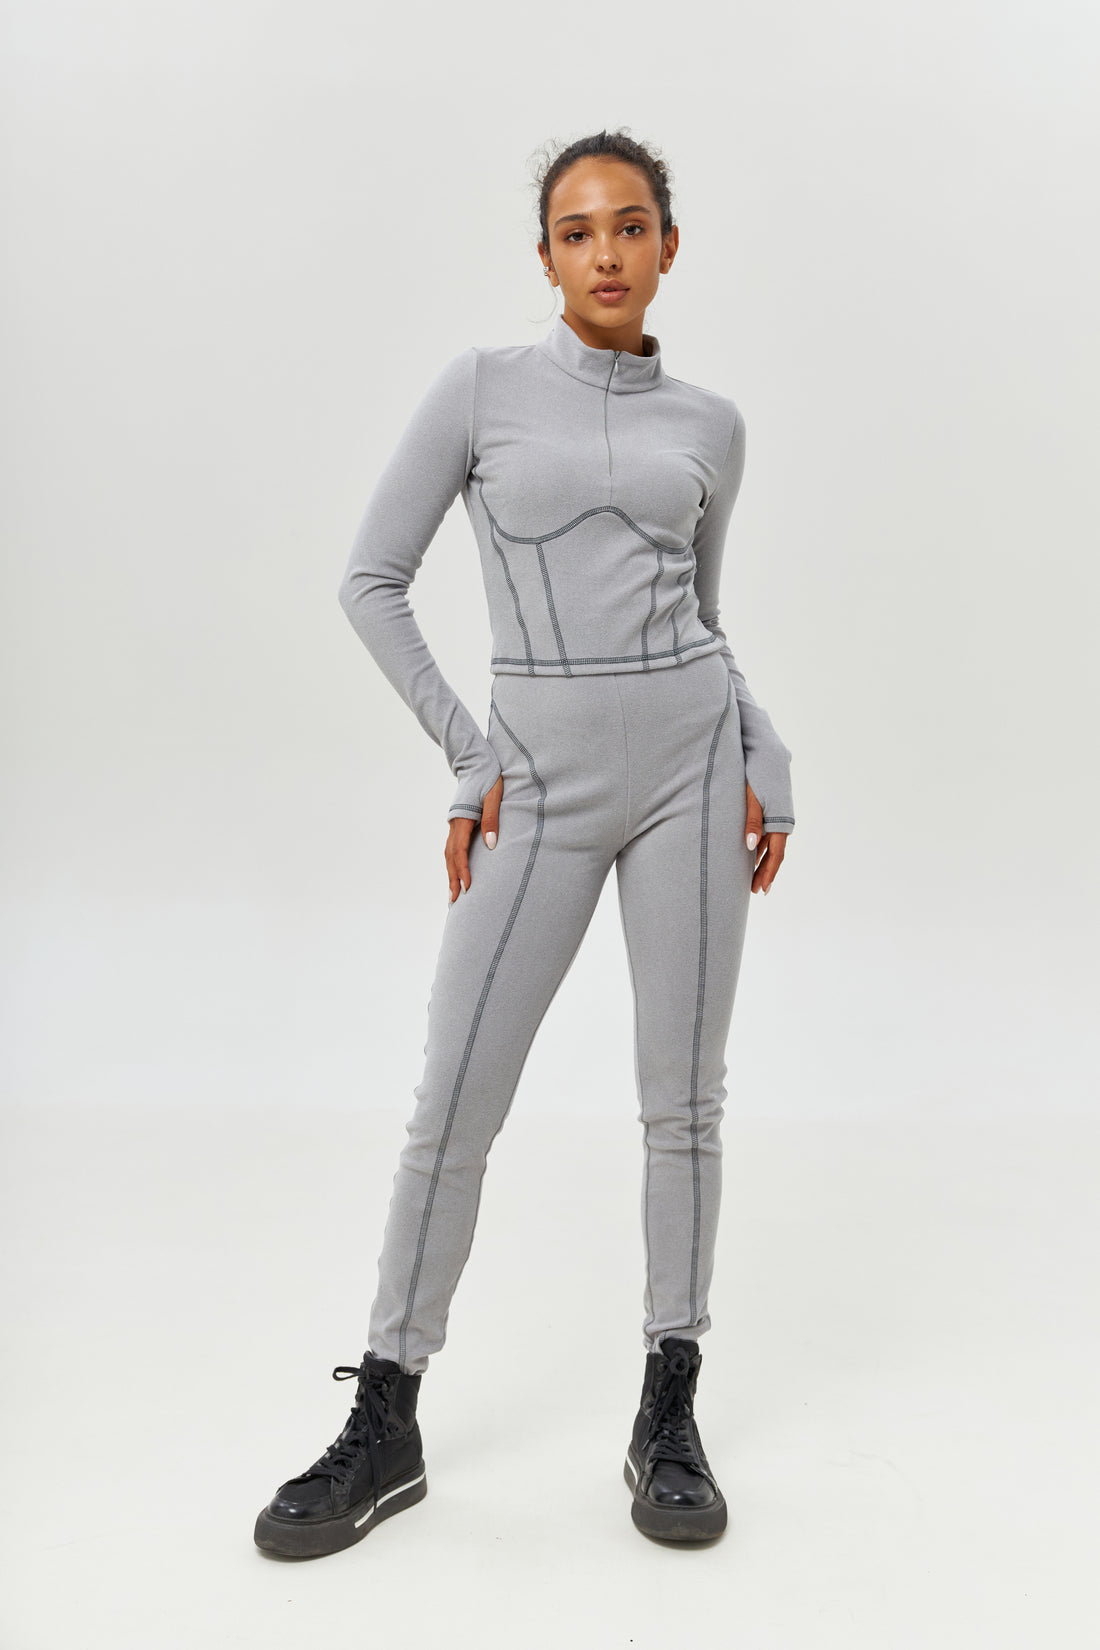 Female base layer - Light grey two piece set for winter - Long johns for women